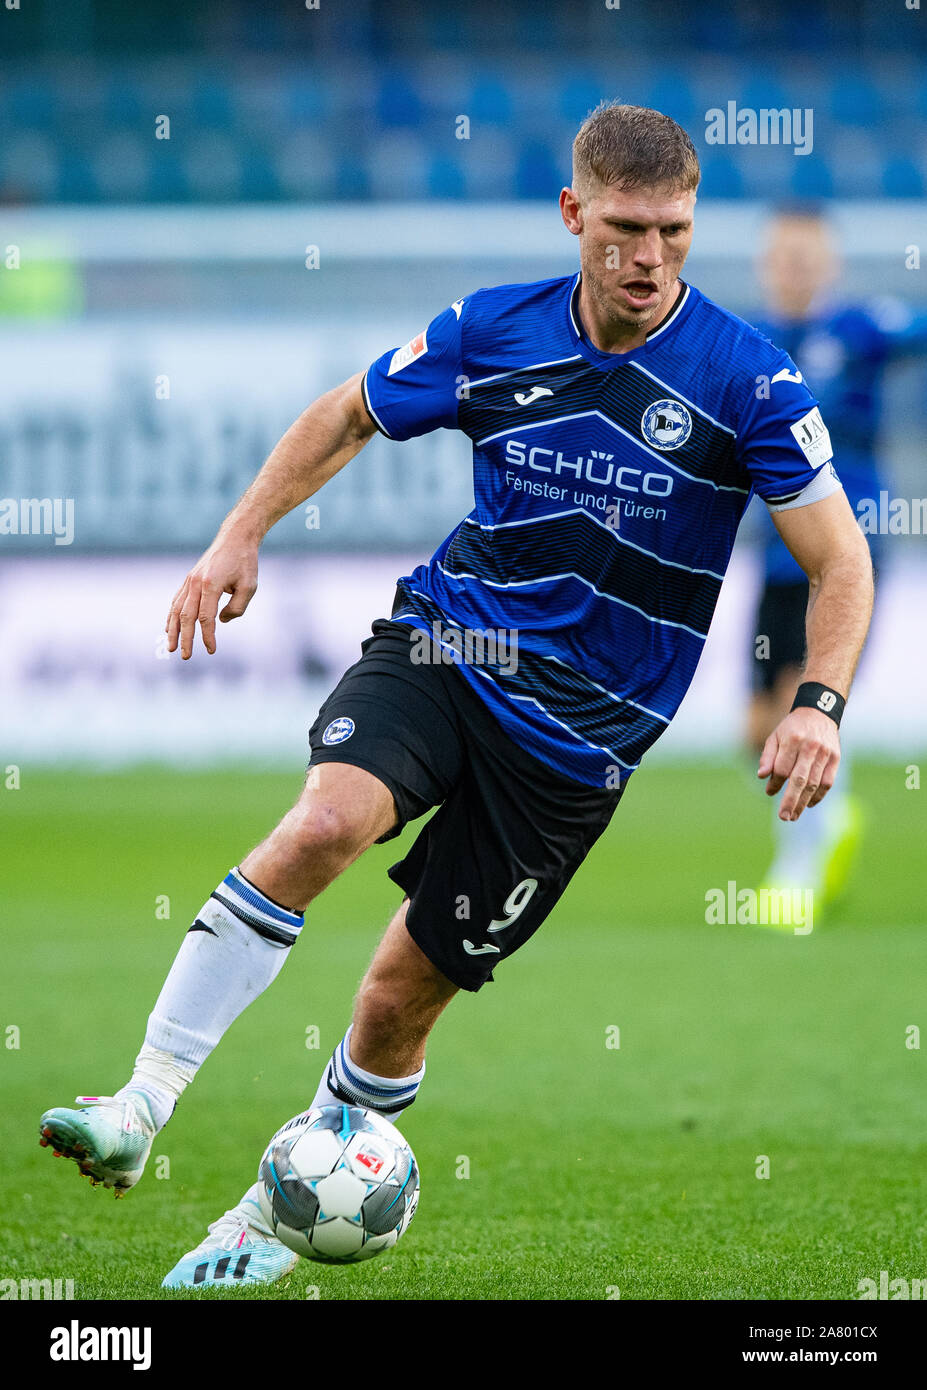 Bielefeld, Germany. 03rd Nov, 2019. Soccer: 2nd Bundesliga, Arminia Bielefeld - Holstein Kiel, 12th matchday in the Schüco Arena. Bielefeld's Fabian Klos on the ball. Credit: Guido Kirchner/dpa - IMPORTANT NOTE: In accordance with the requirements of the DFL Deutsche Fußball Liga or the DFB Deutscher Fußball-Bund, it is prohibited to use or have used photographs taken in the stadium and/or the match in the form of sequence images and/or video-like photo sequences./dpa/Alamy Live News Stock Photo